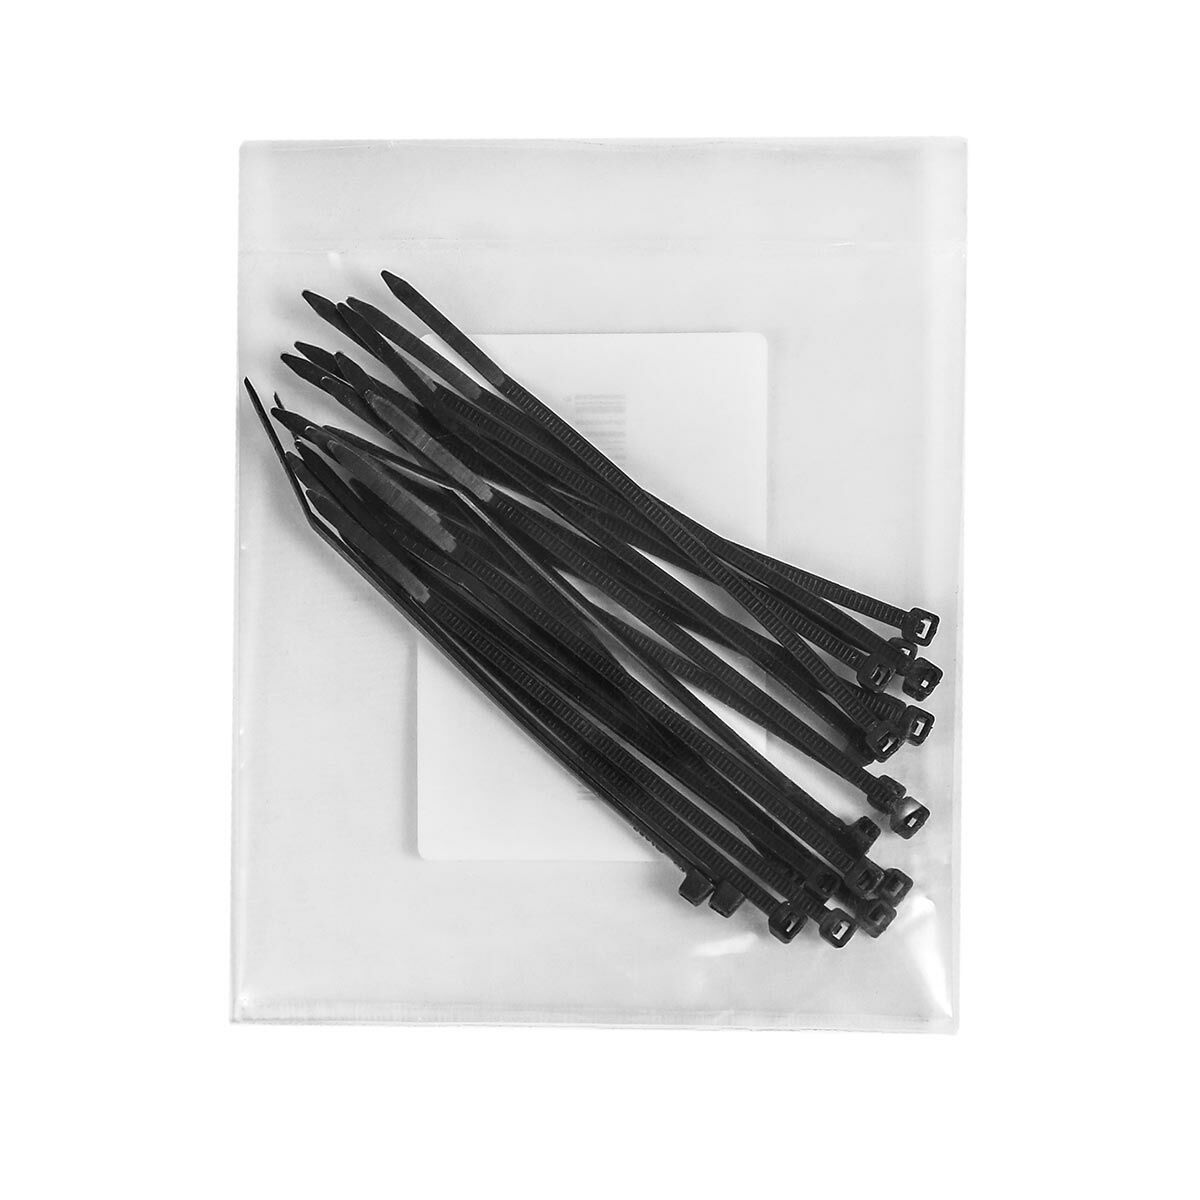 100mm x 2.5mm Cable Ties, 20pcs image 7